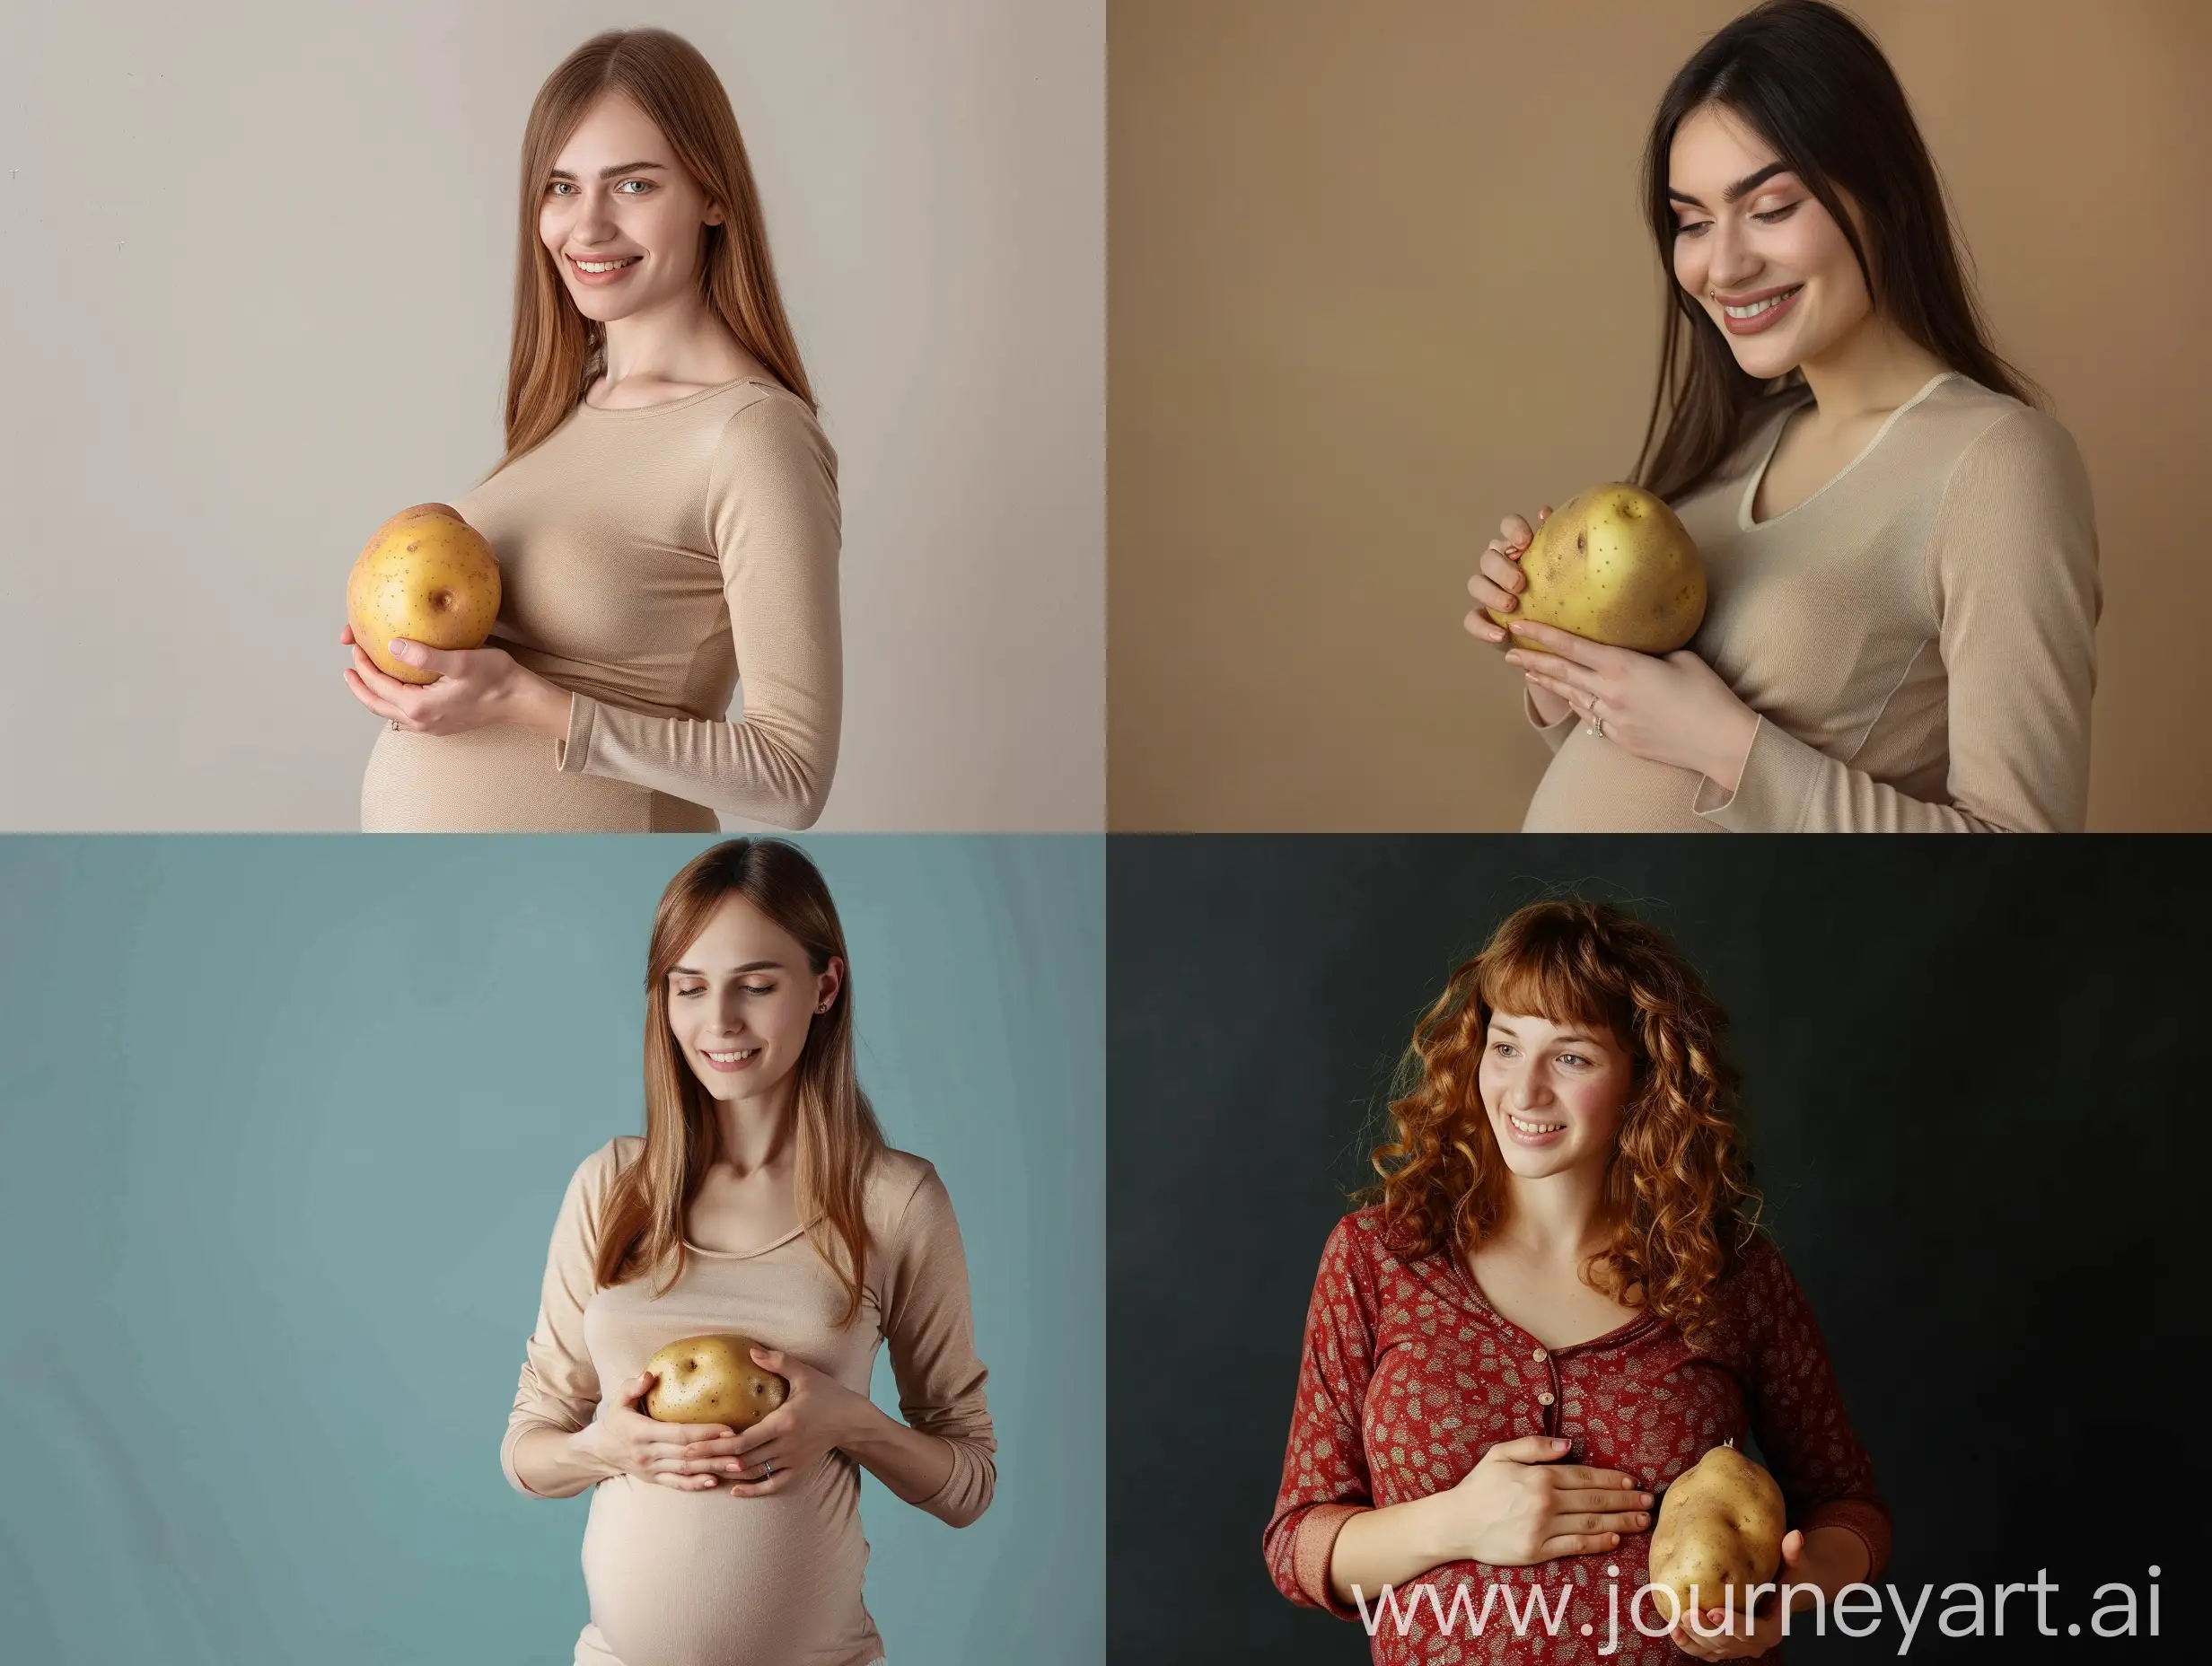 An attractive advertising photo of a pregnant woman holding a potato